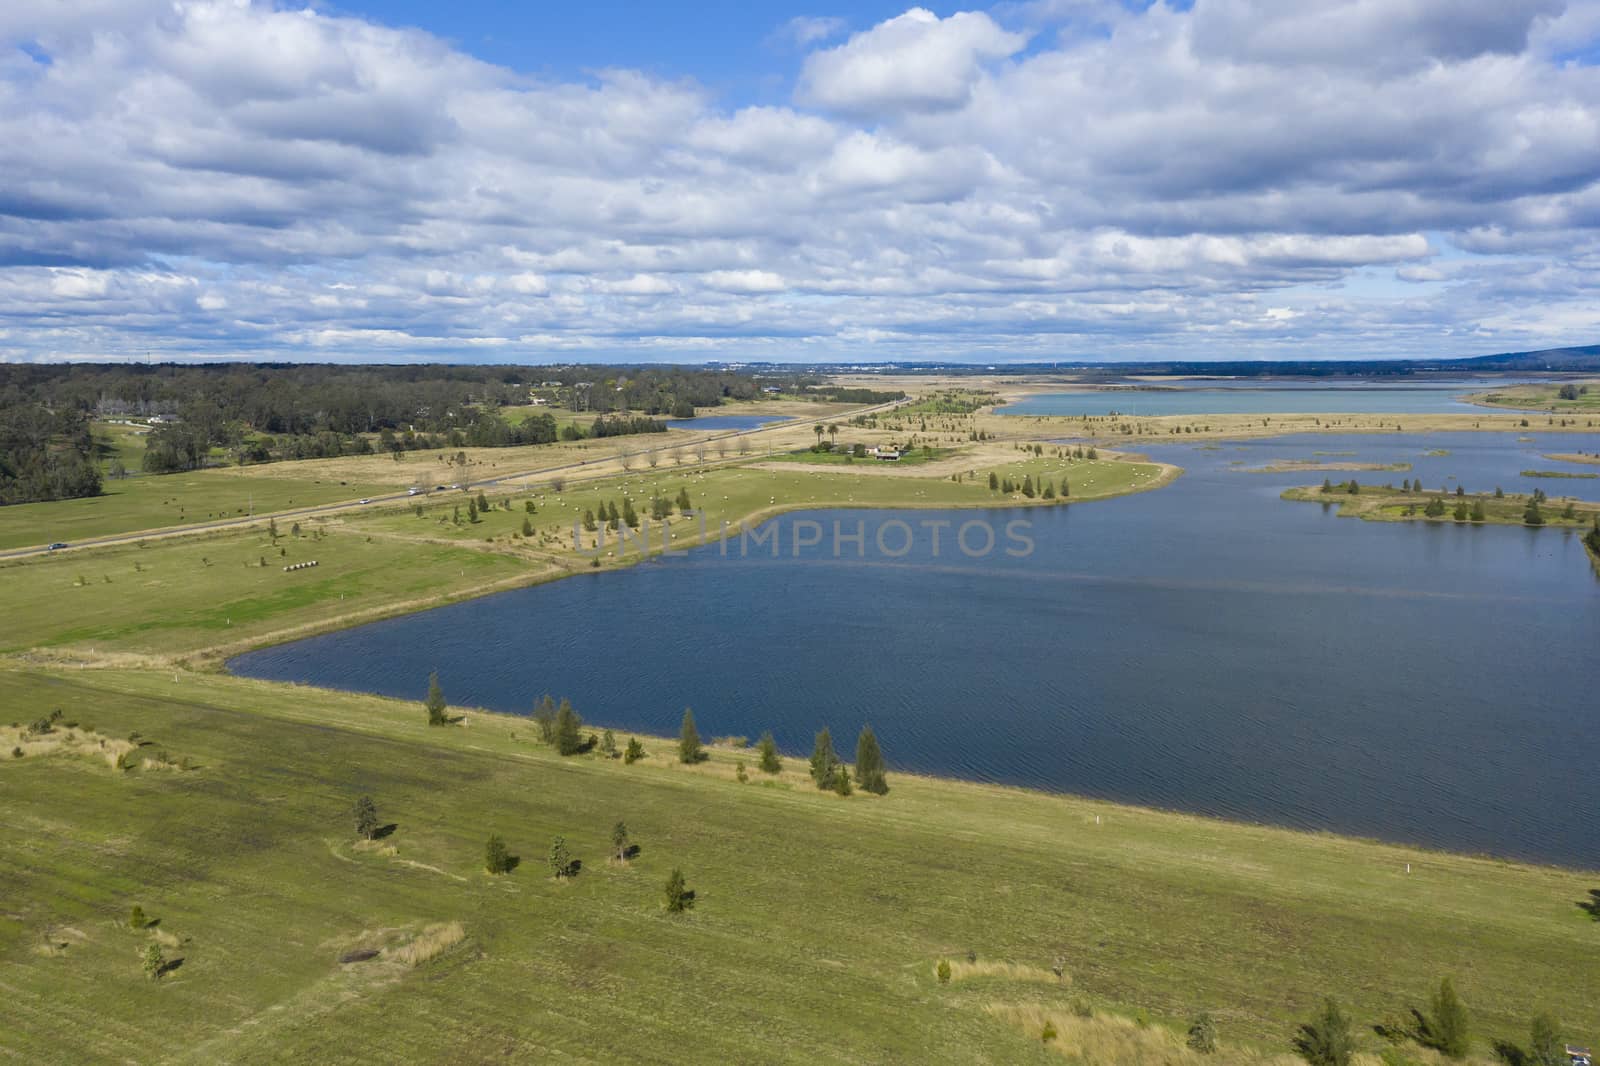 Aerial photograph of a large fresh water reservoir near Castlereagh in New South Wales in Regional Australia